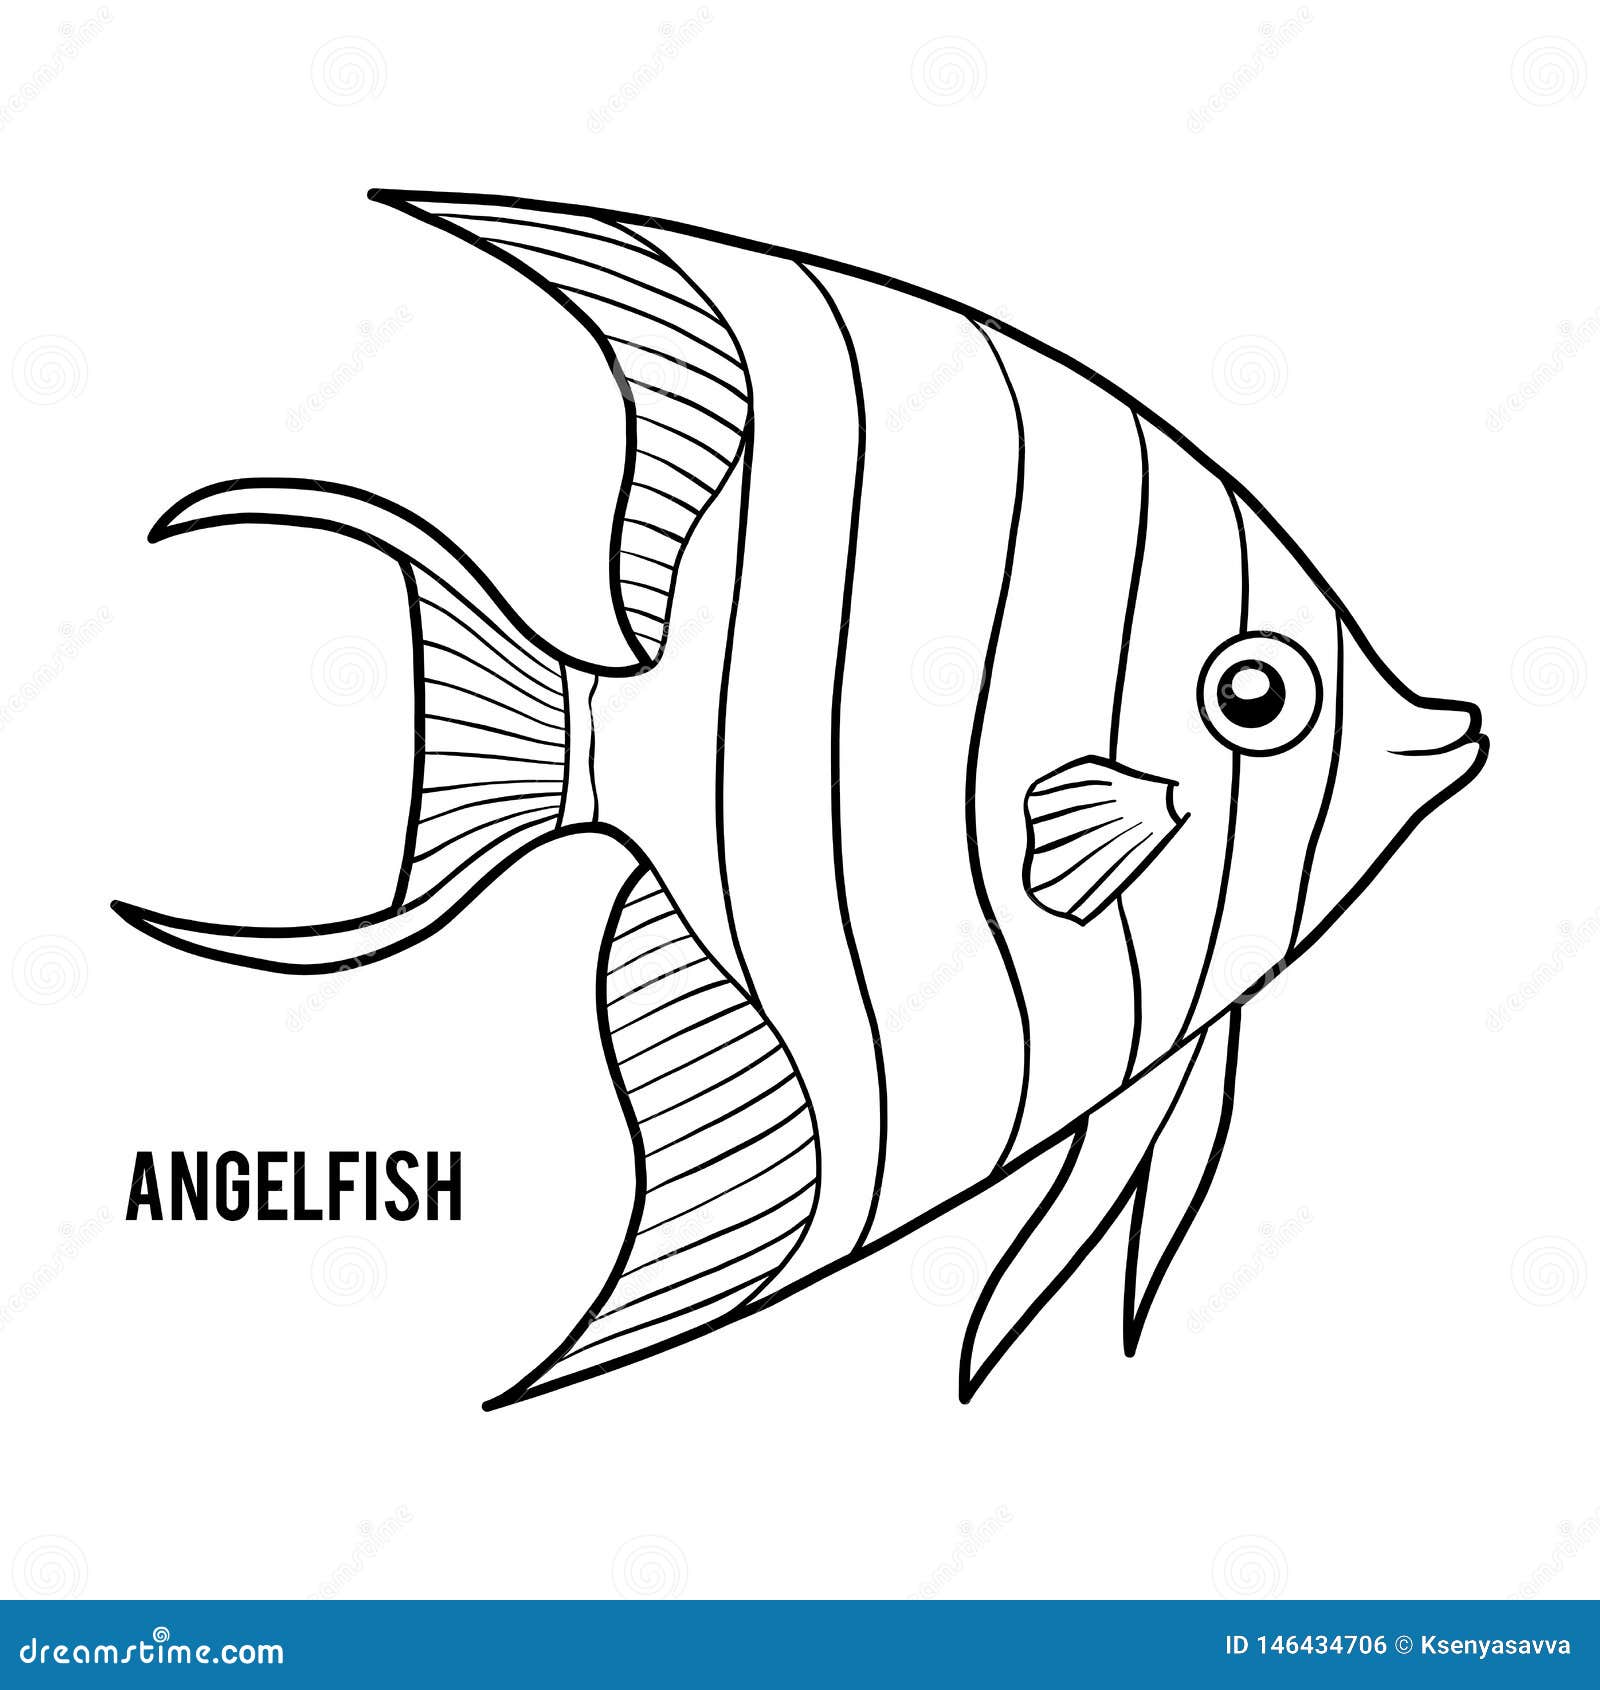 Coloring book, Angelfish stock vector. Illustration of child - 146434706